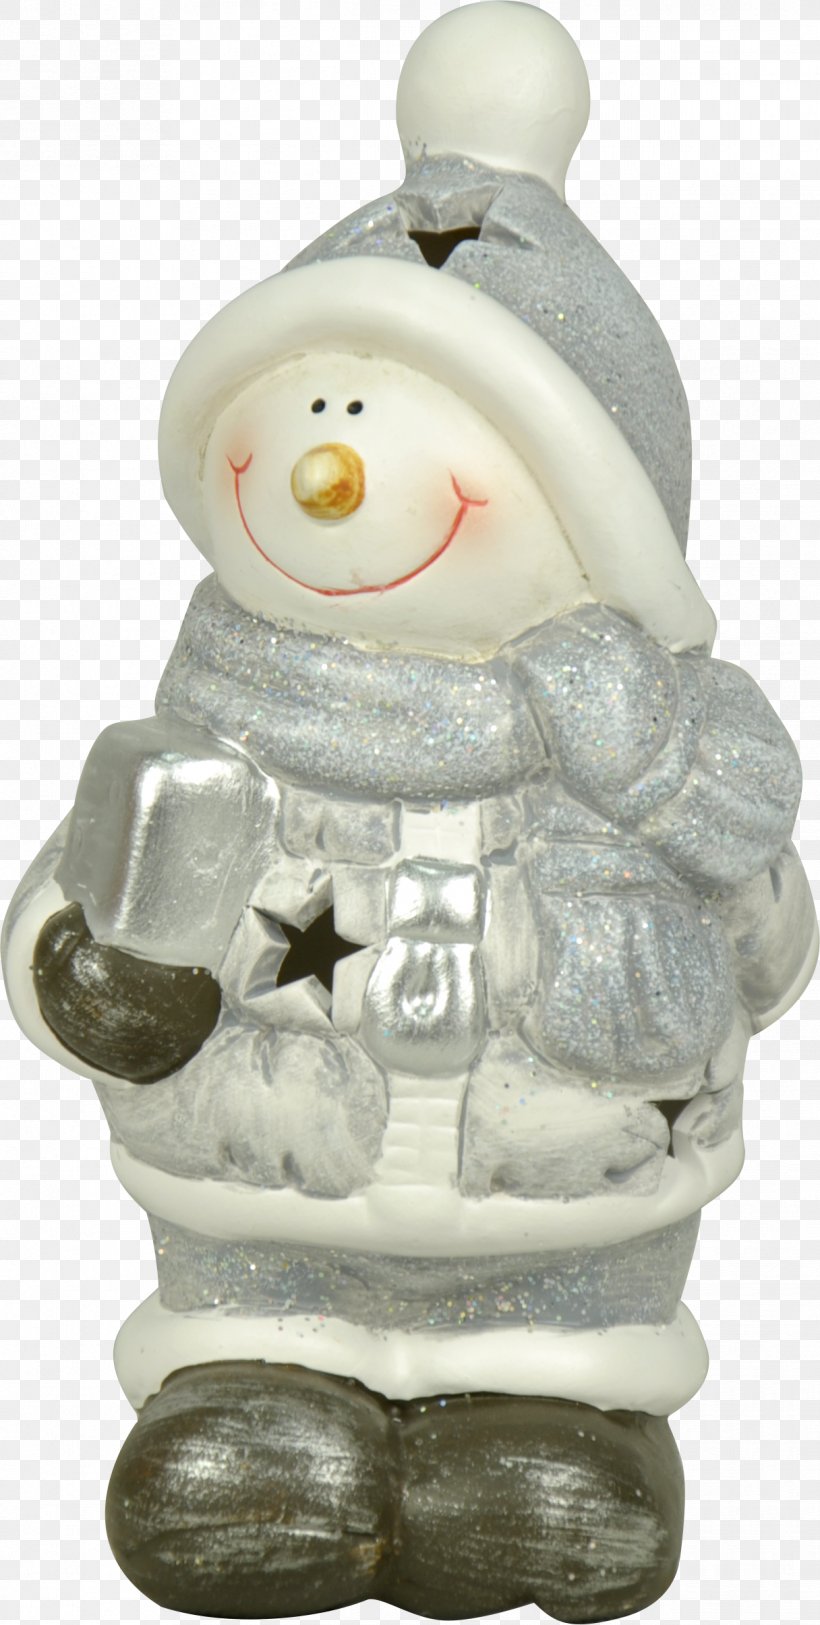 Figurine The Snowman, PNG, 1216x2410px, Figurine, Christmas Ornament, Snowman Download Free